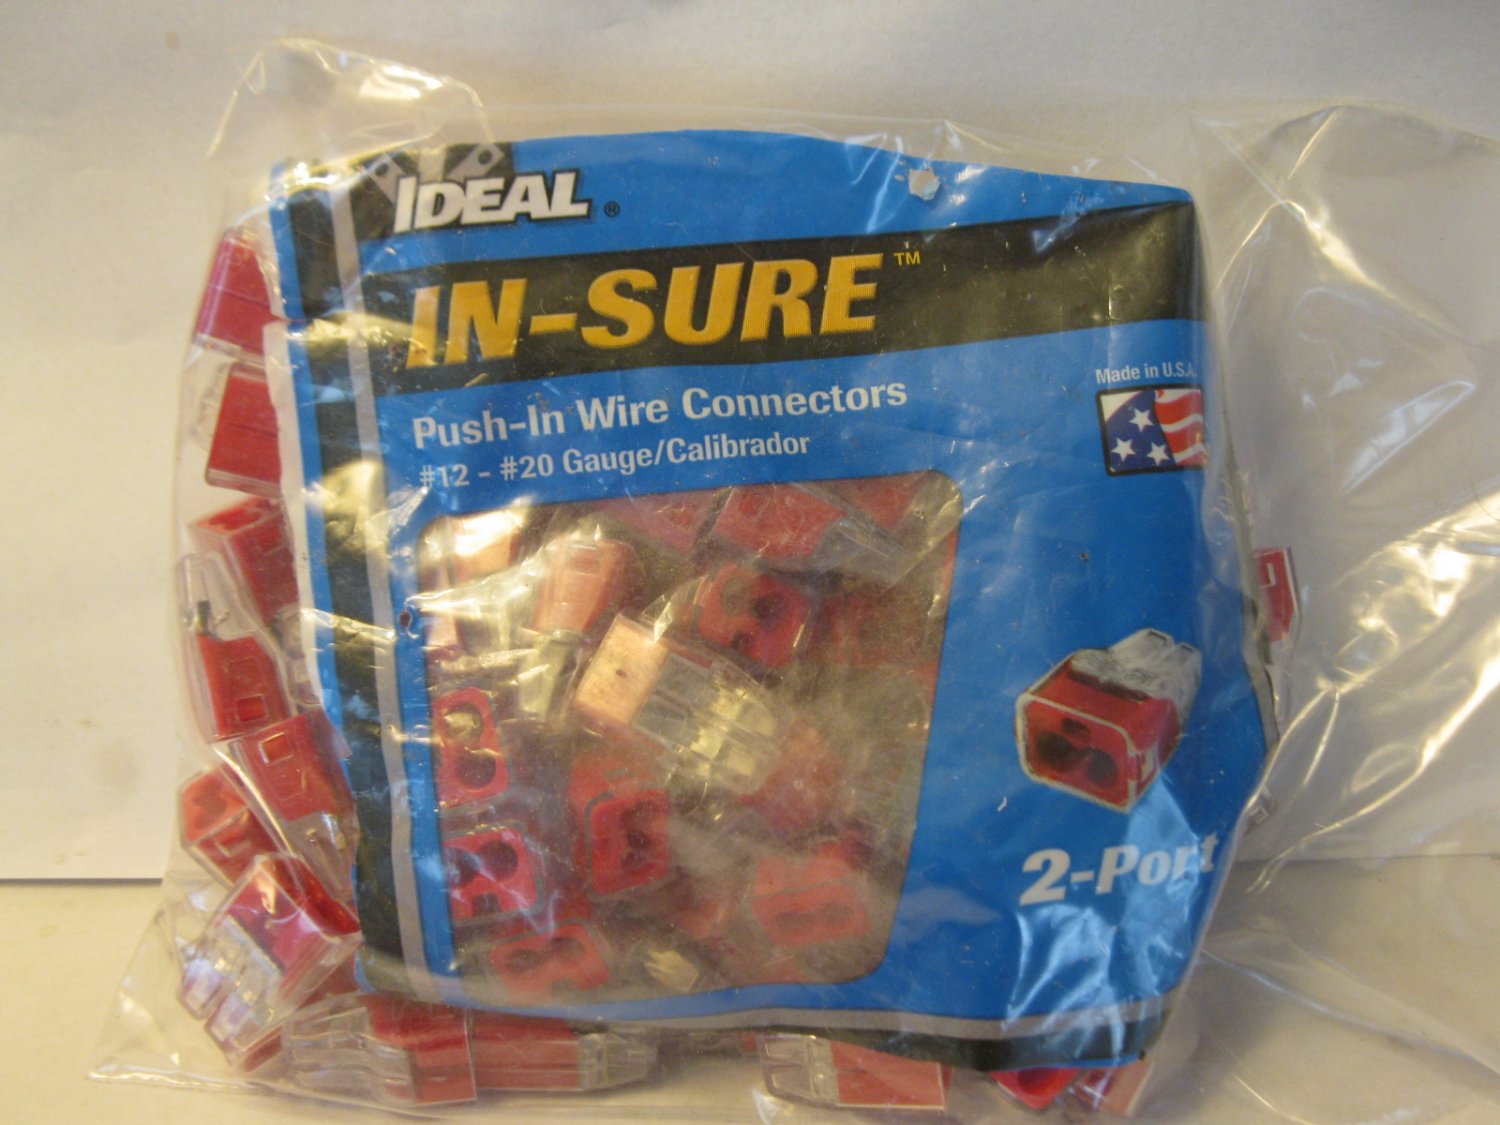 (10) Ideal In-Sure Push-In 2 Port Red Wire Connectors - #12-20 Gauge- Brand New